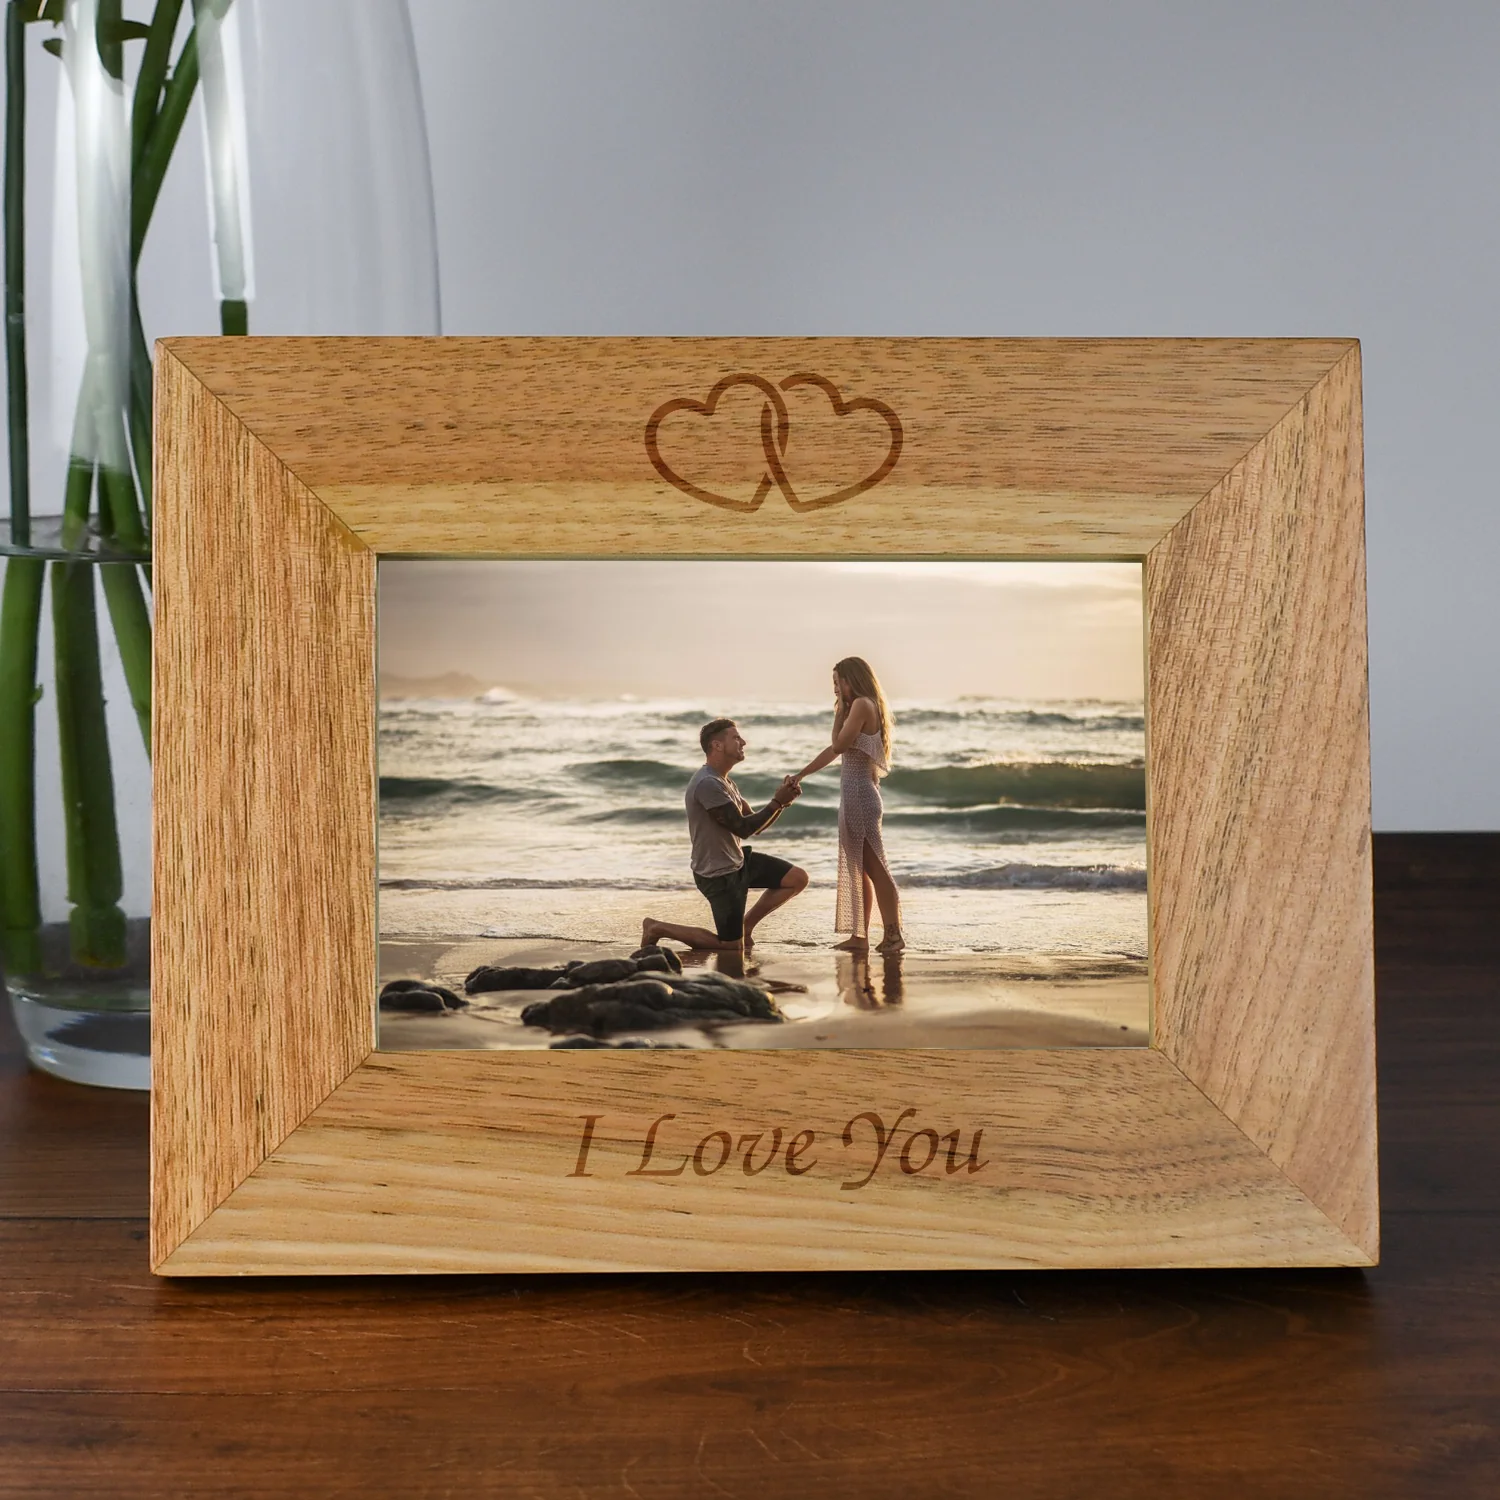 Craft Ideas for Decorating Wooden Picture Frames5